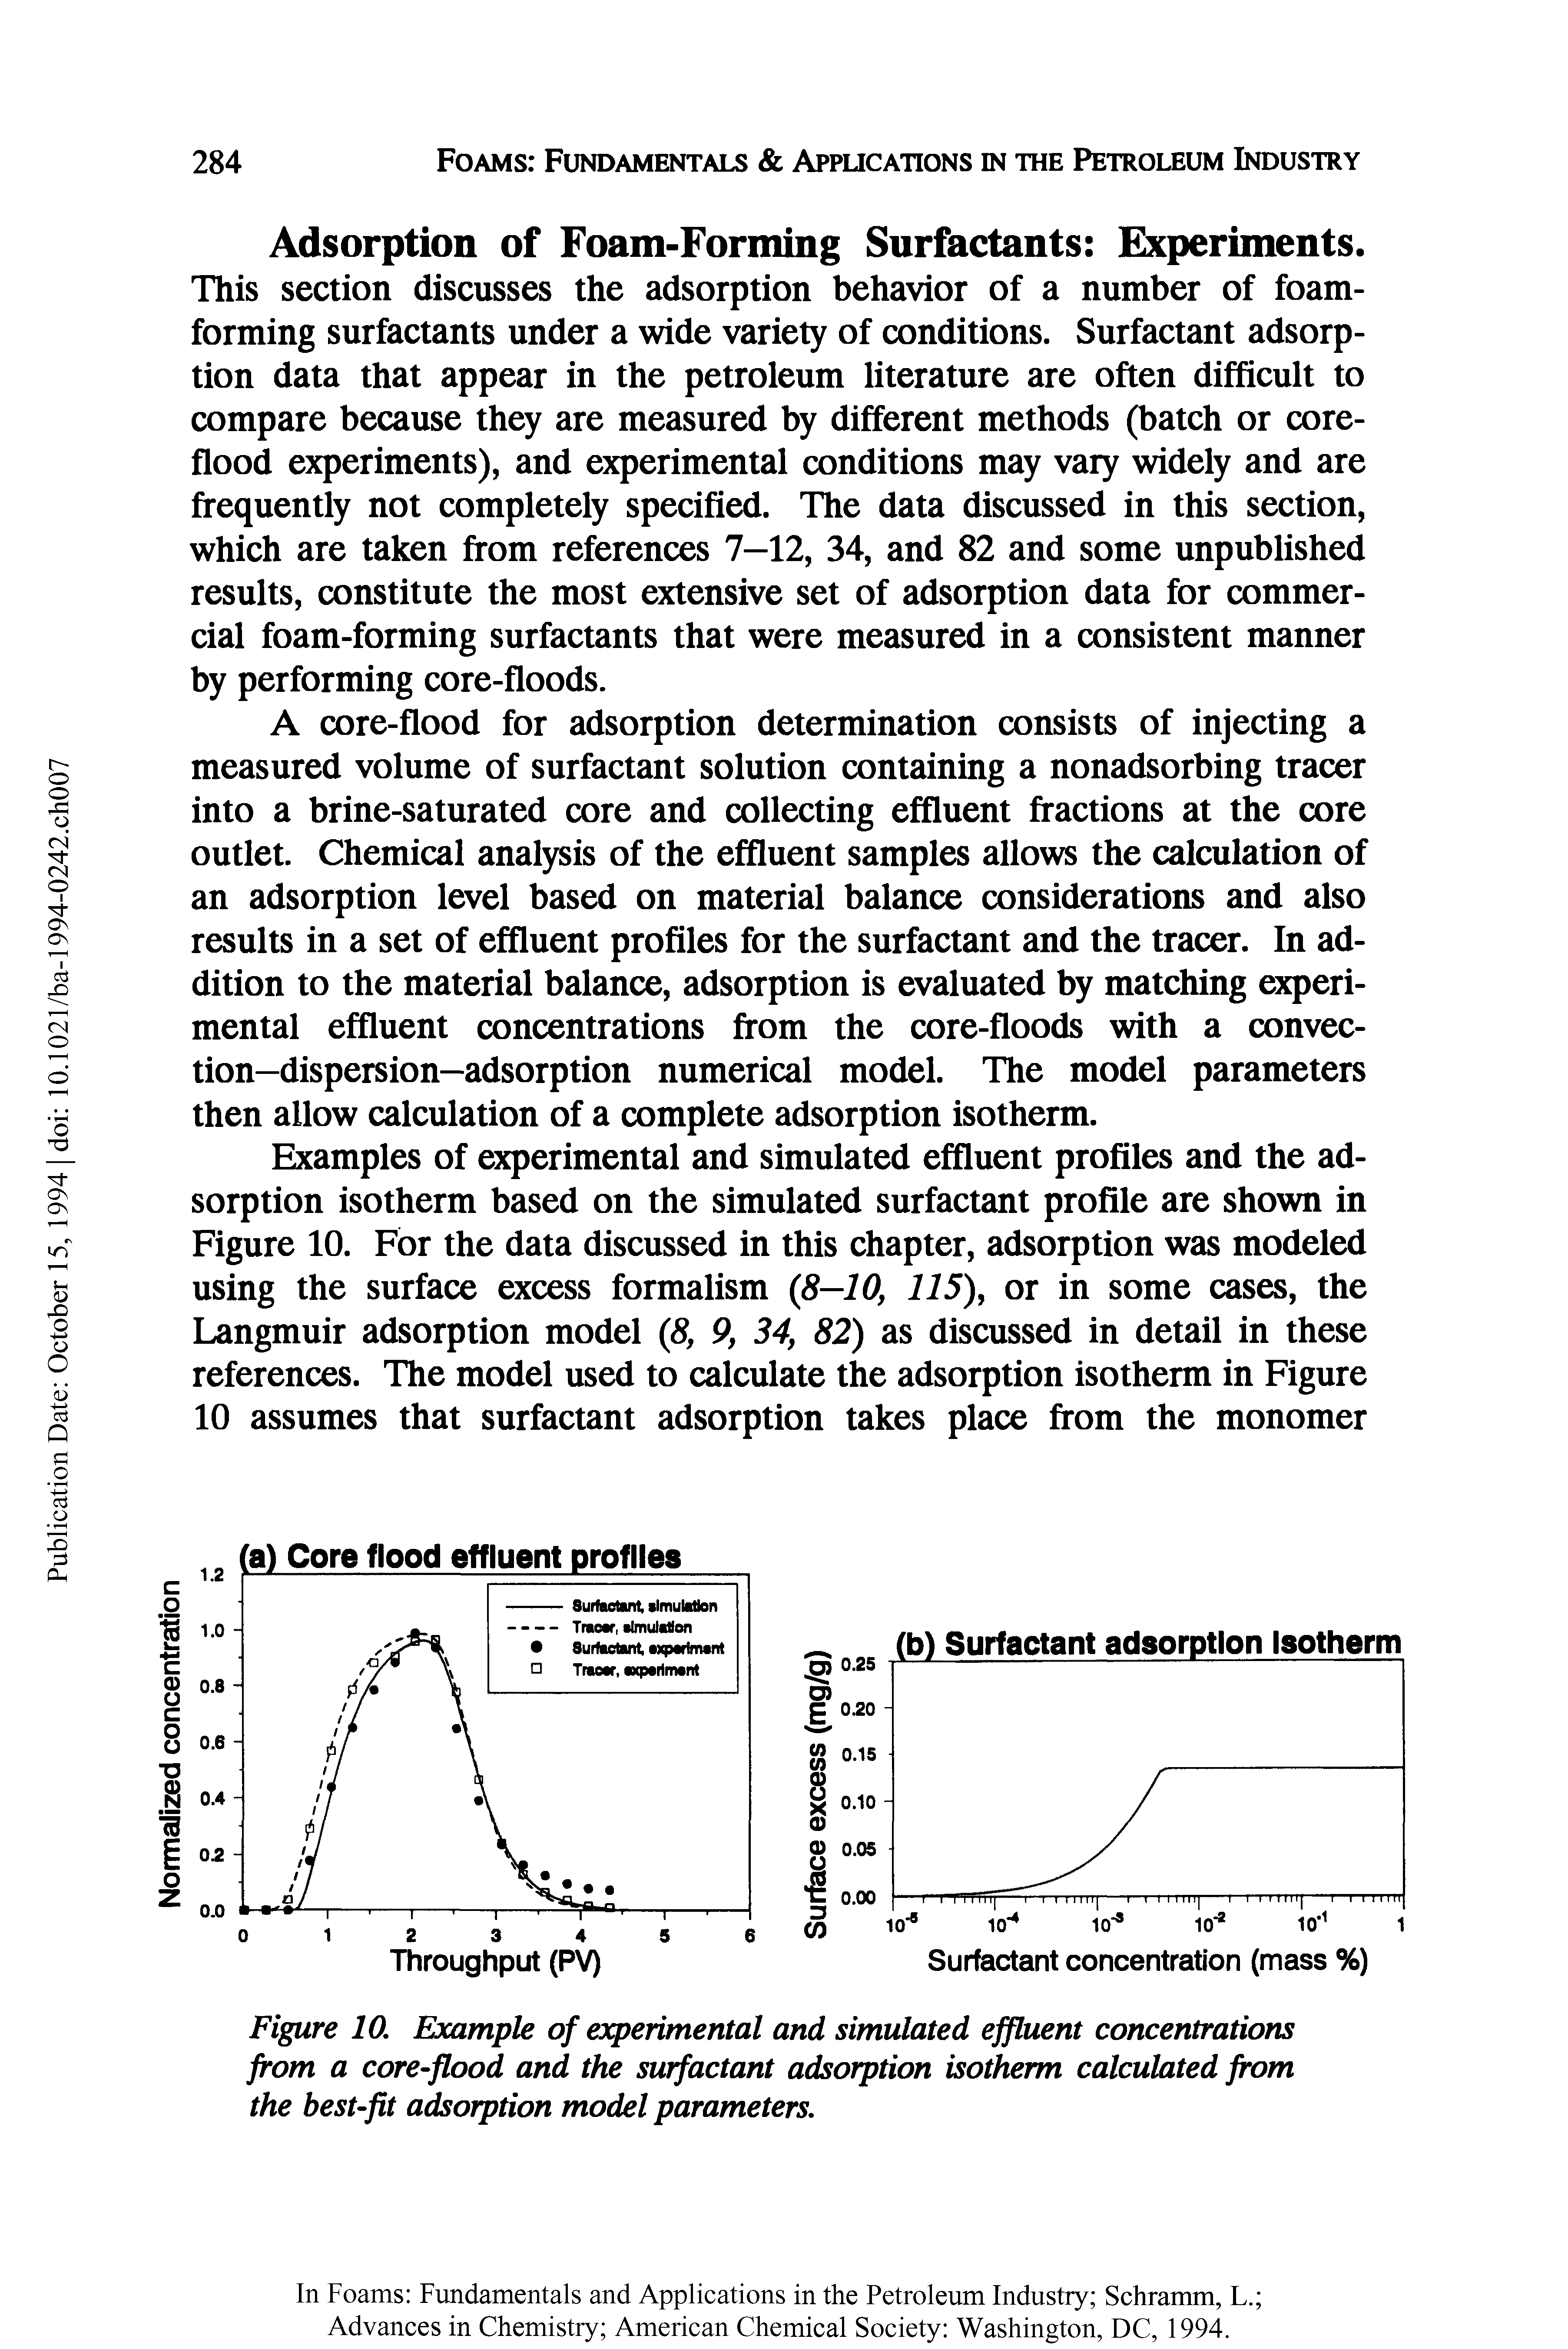 Figure 10. Example of experimental and simulated effluent concentrations from a core-flood and the surfactant adsorption isotherm calculated from the best-fit adsorption model parameters.